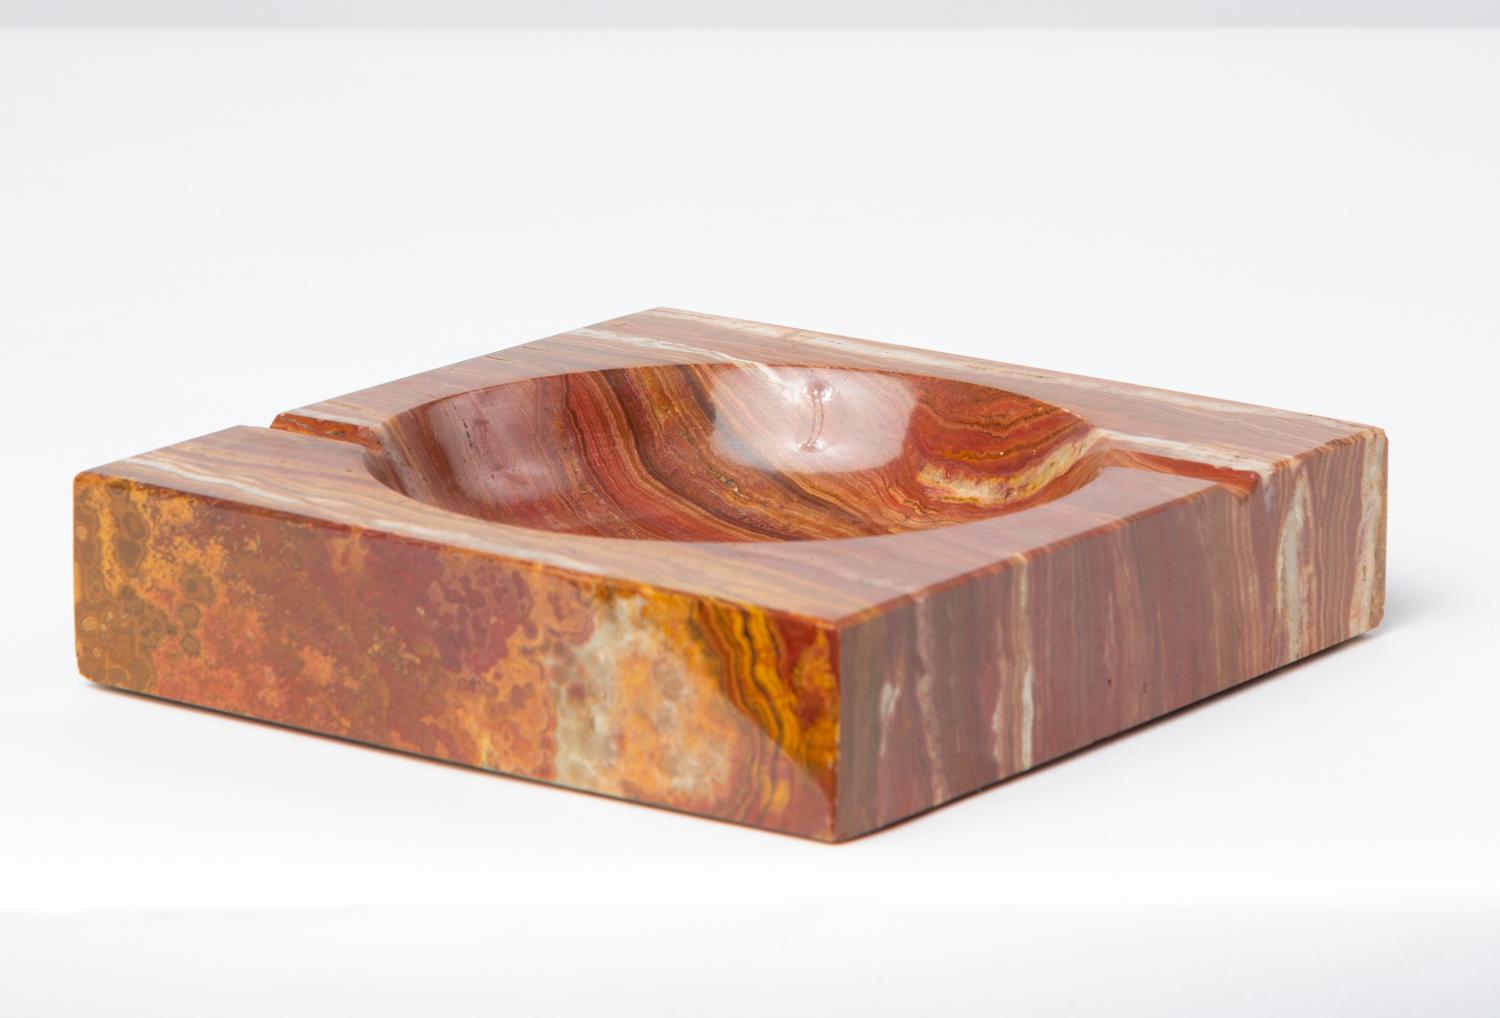 American Vintage Square Ashtray in Red Onyx